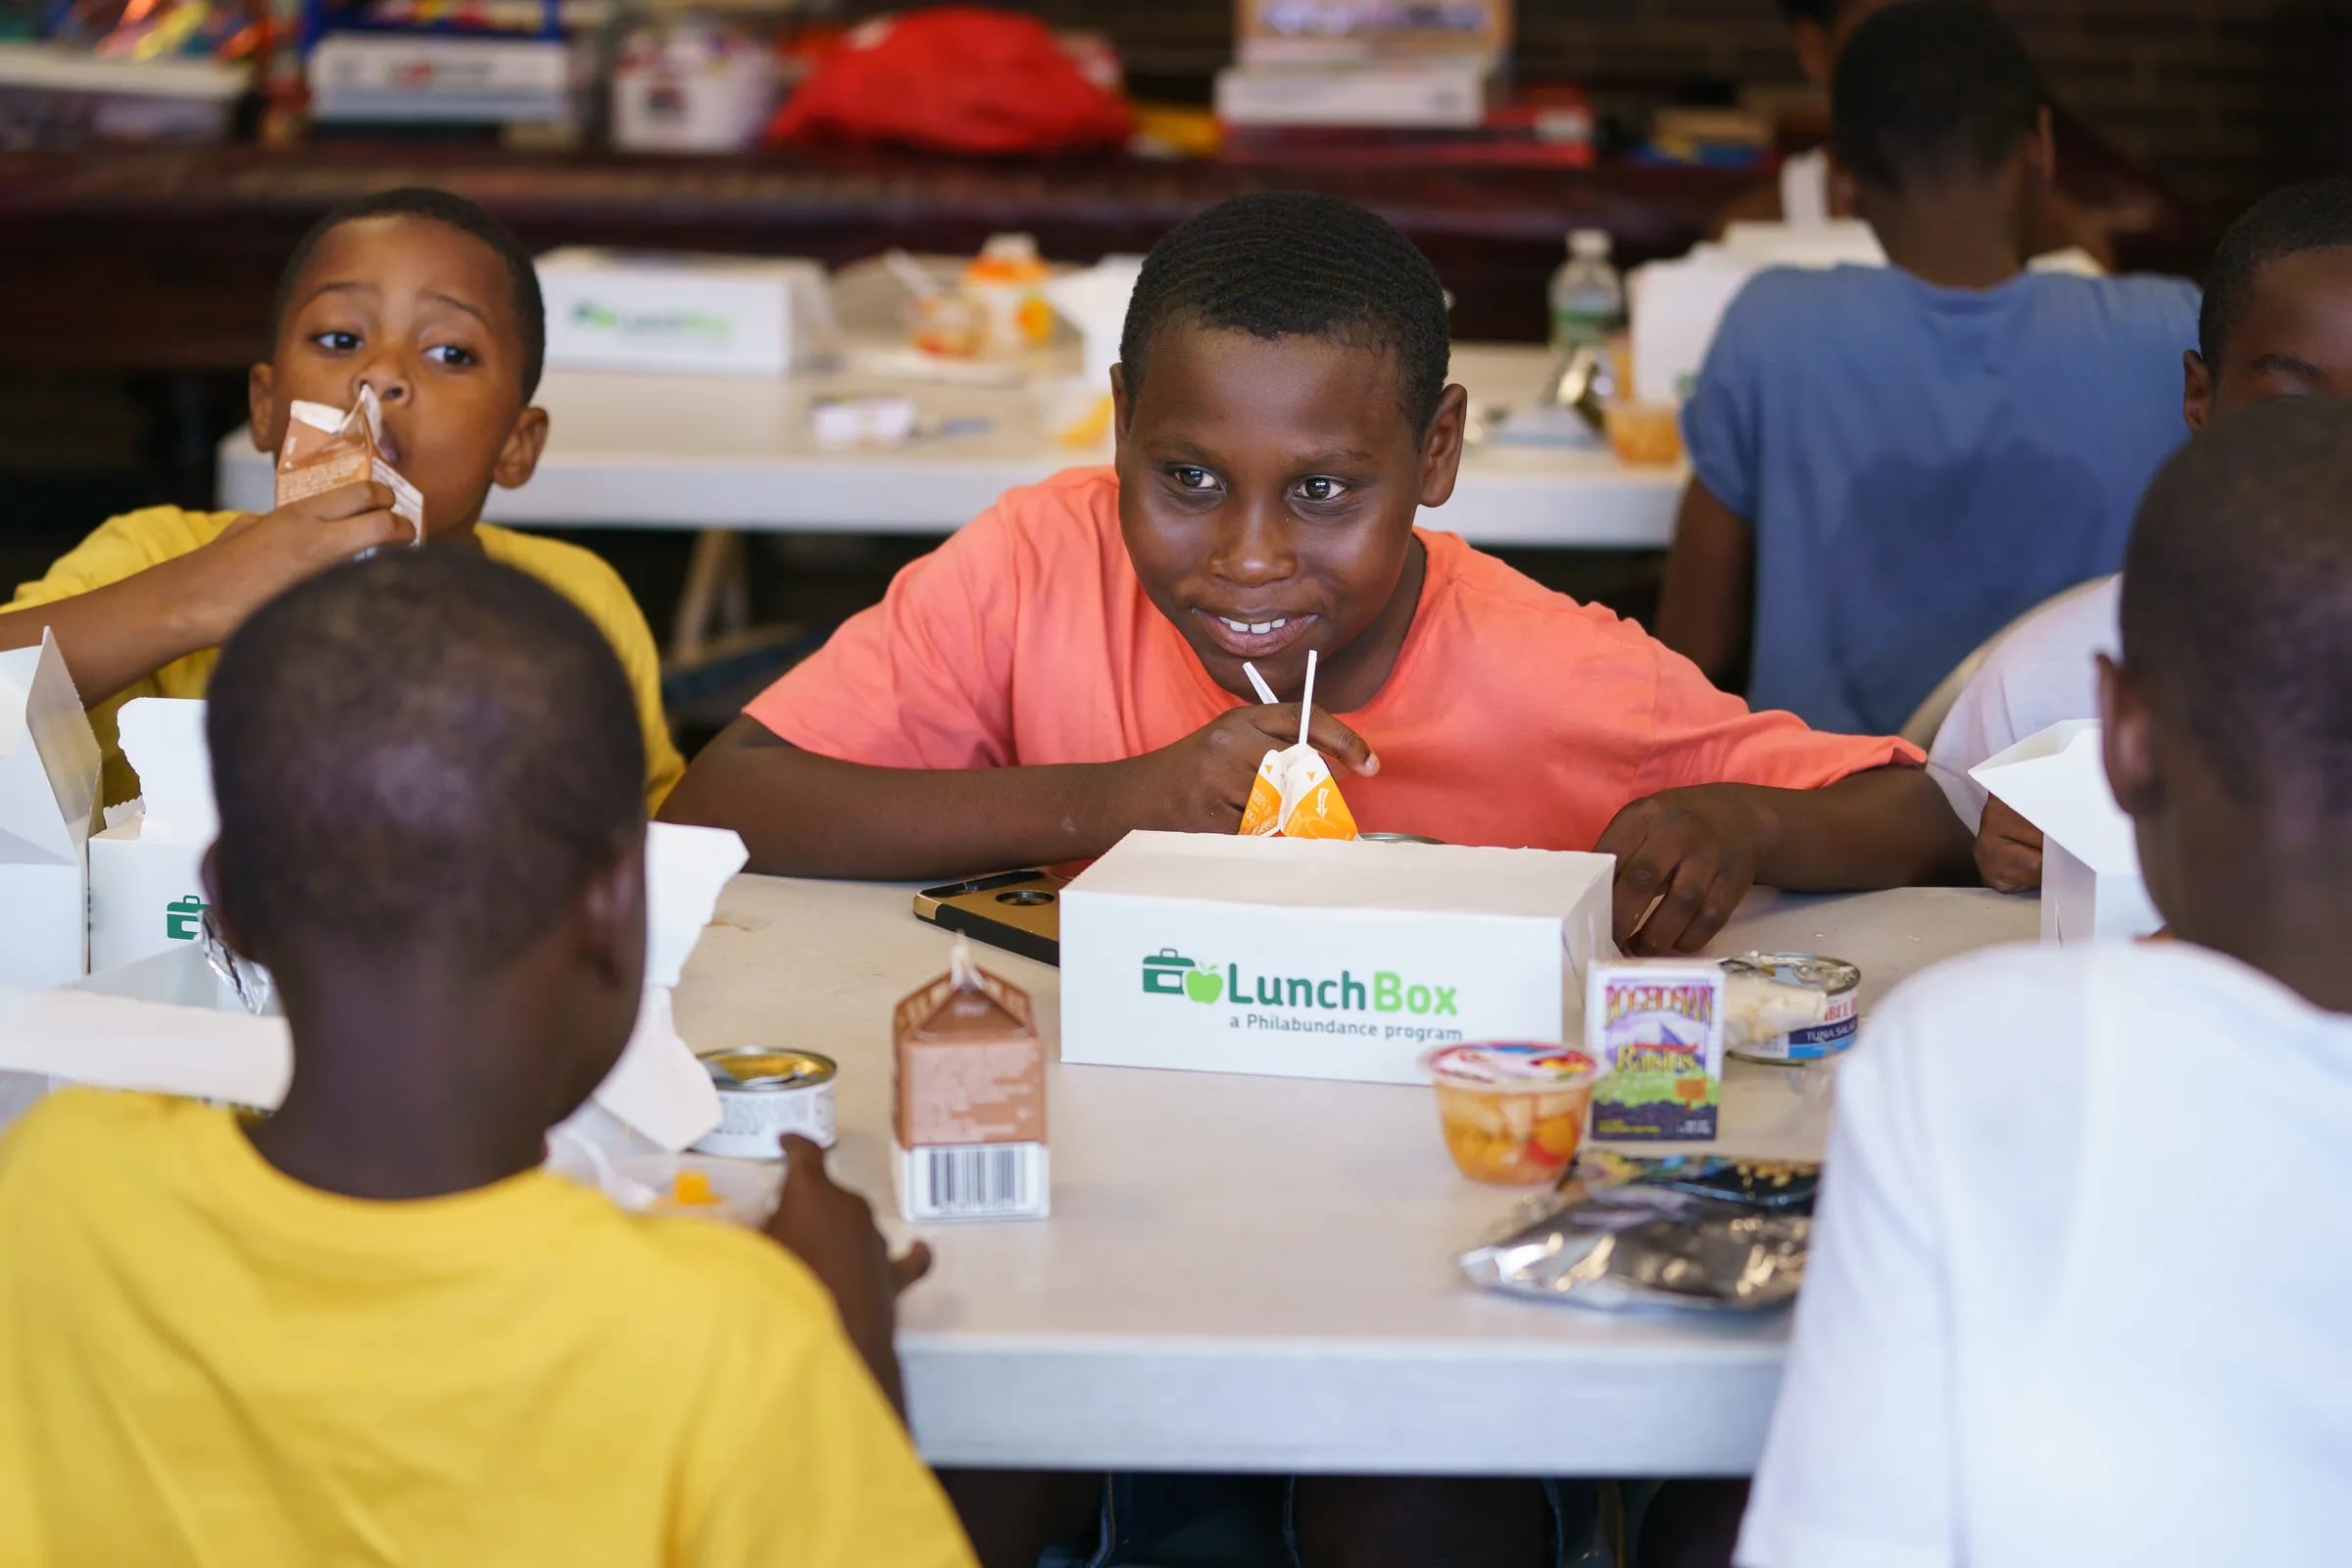 Sabre Washington, 7, left, Hytheem Fielder, 13, center, during a lunch provided by Philabundance at the Police Athletic League, in South Philadelphia, July 10, 2019. Philabundance provides free summer lunches through its Summer Lunchbox meal program at various locations throughout the city.